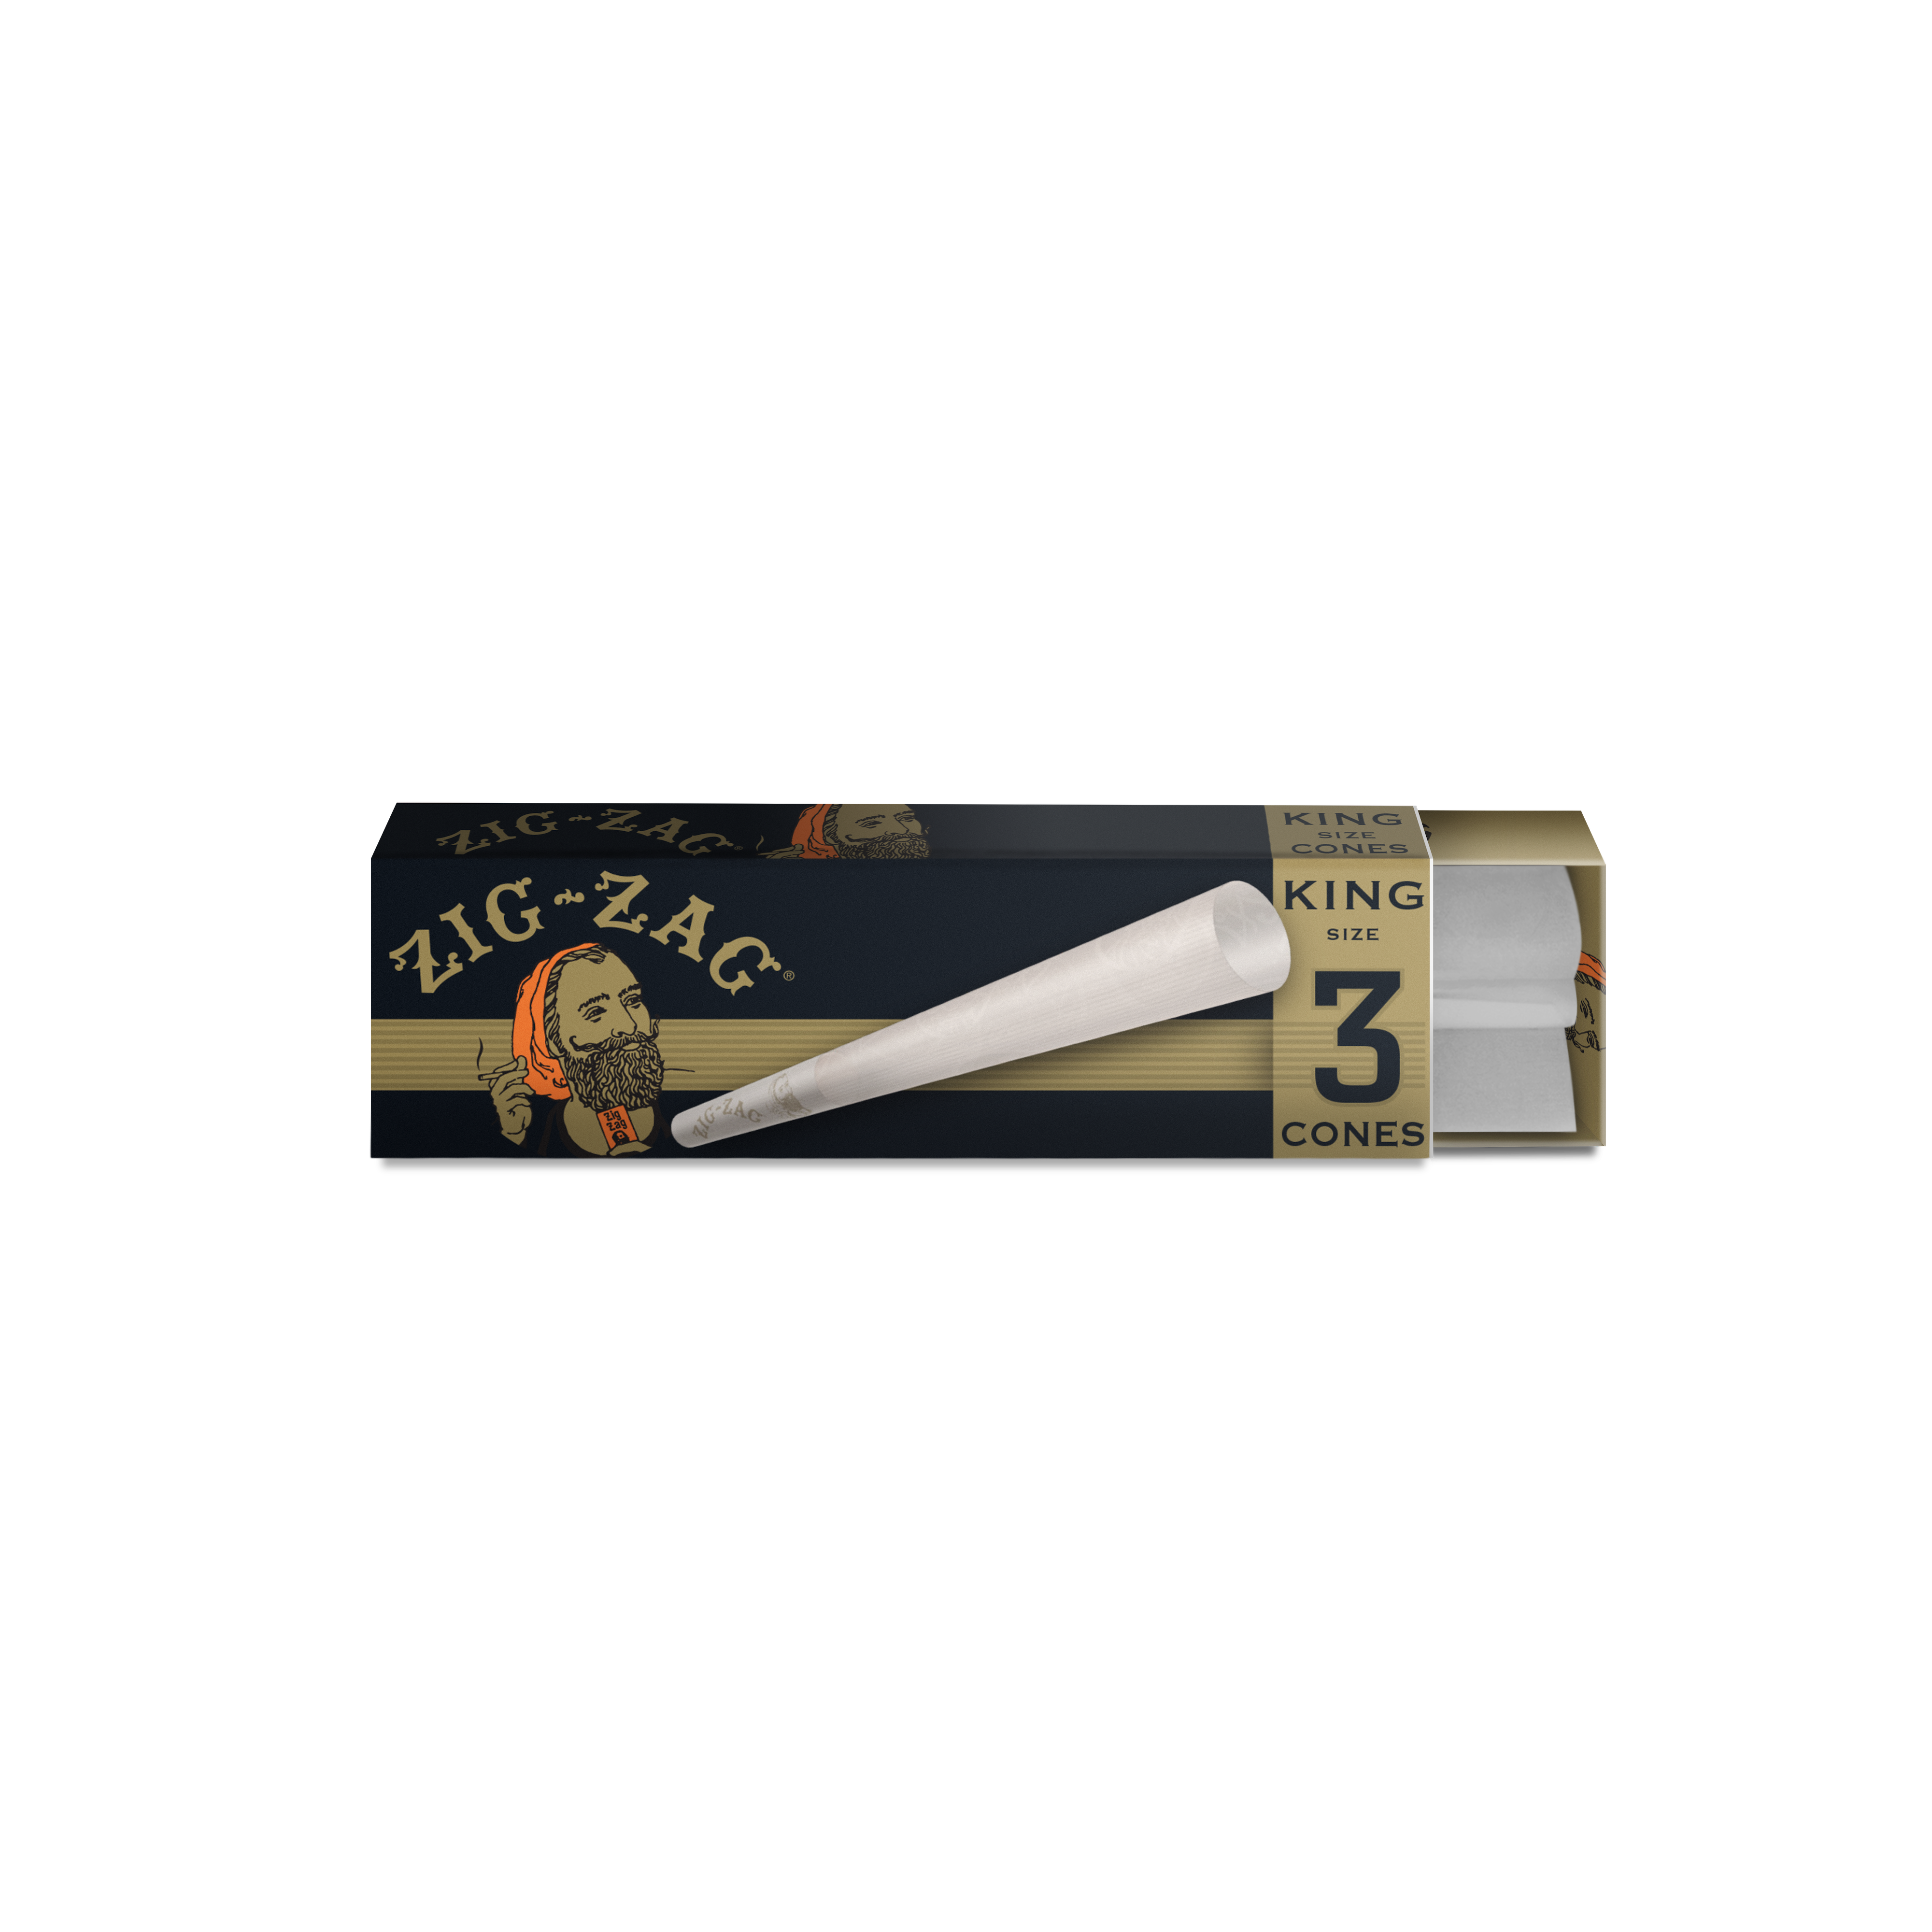 Promo Display (36 Pack) - King Size Cones